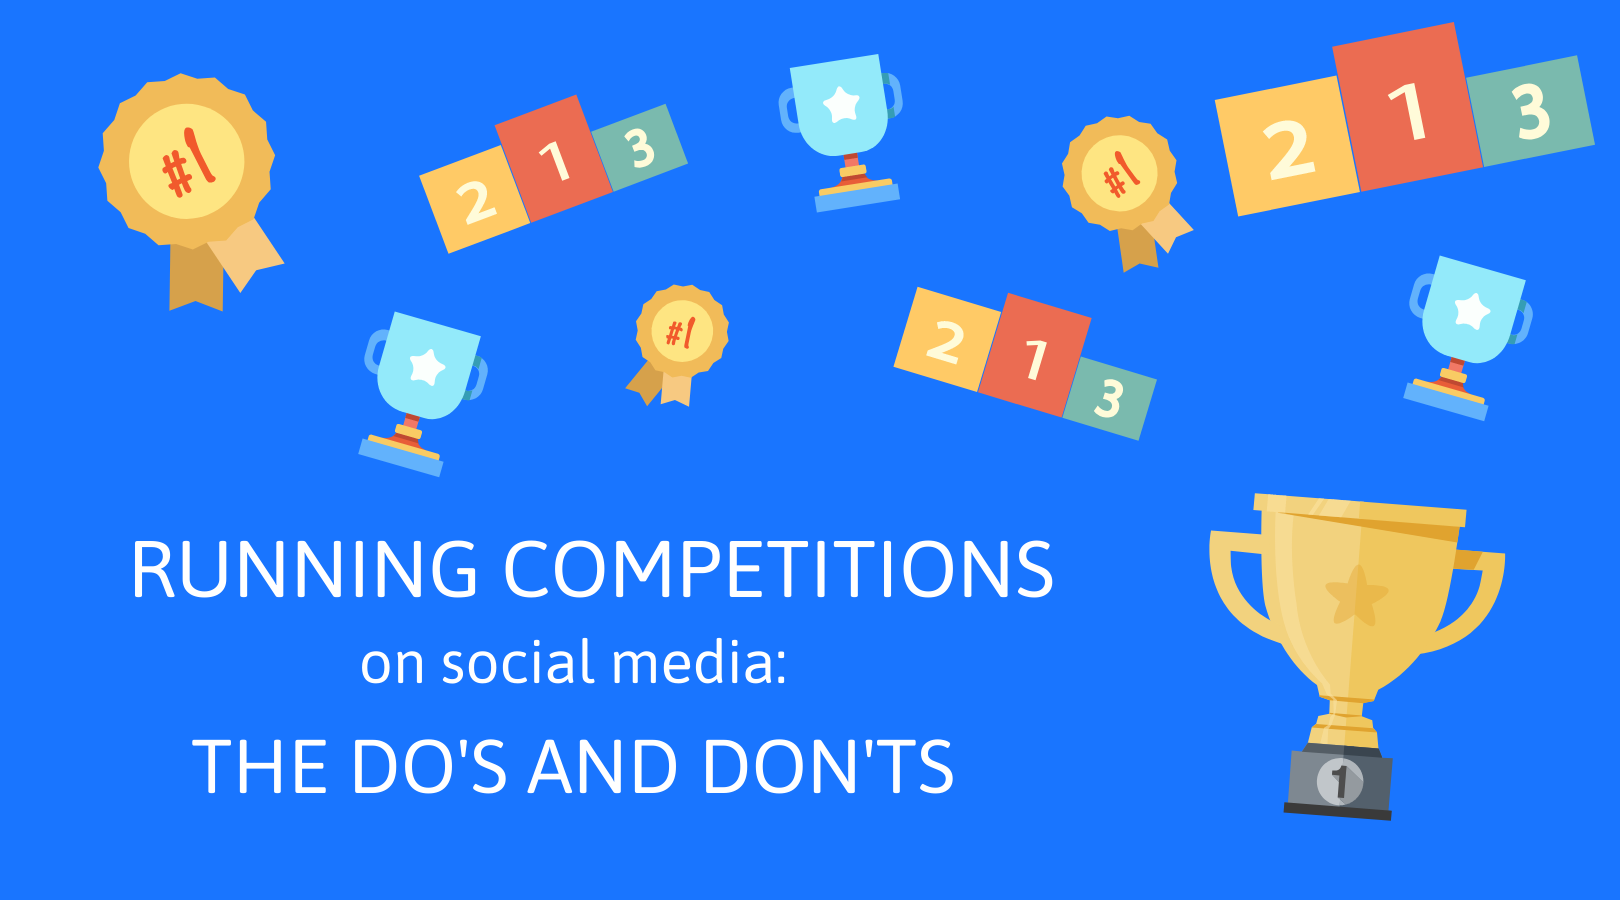 3 Running competitions on social media - the do’s and don’ts.